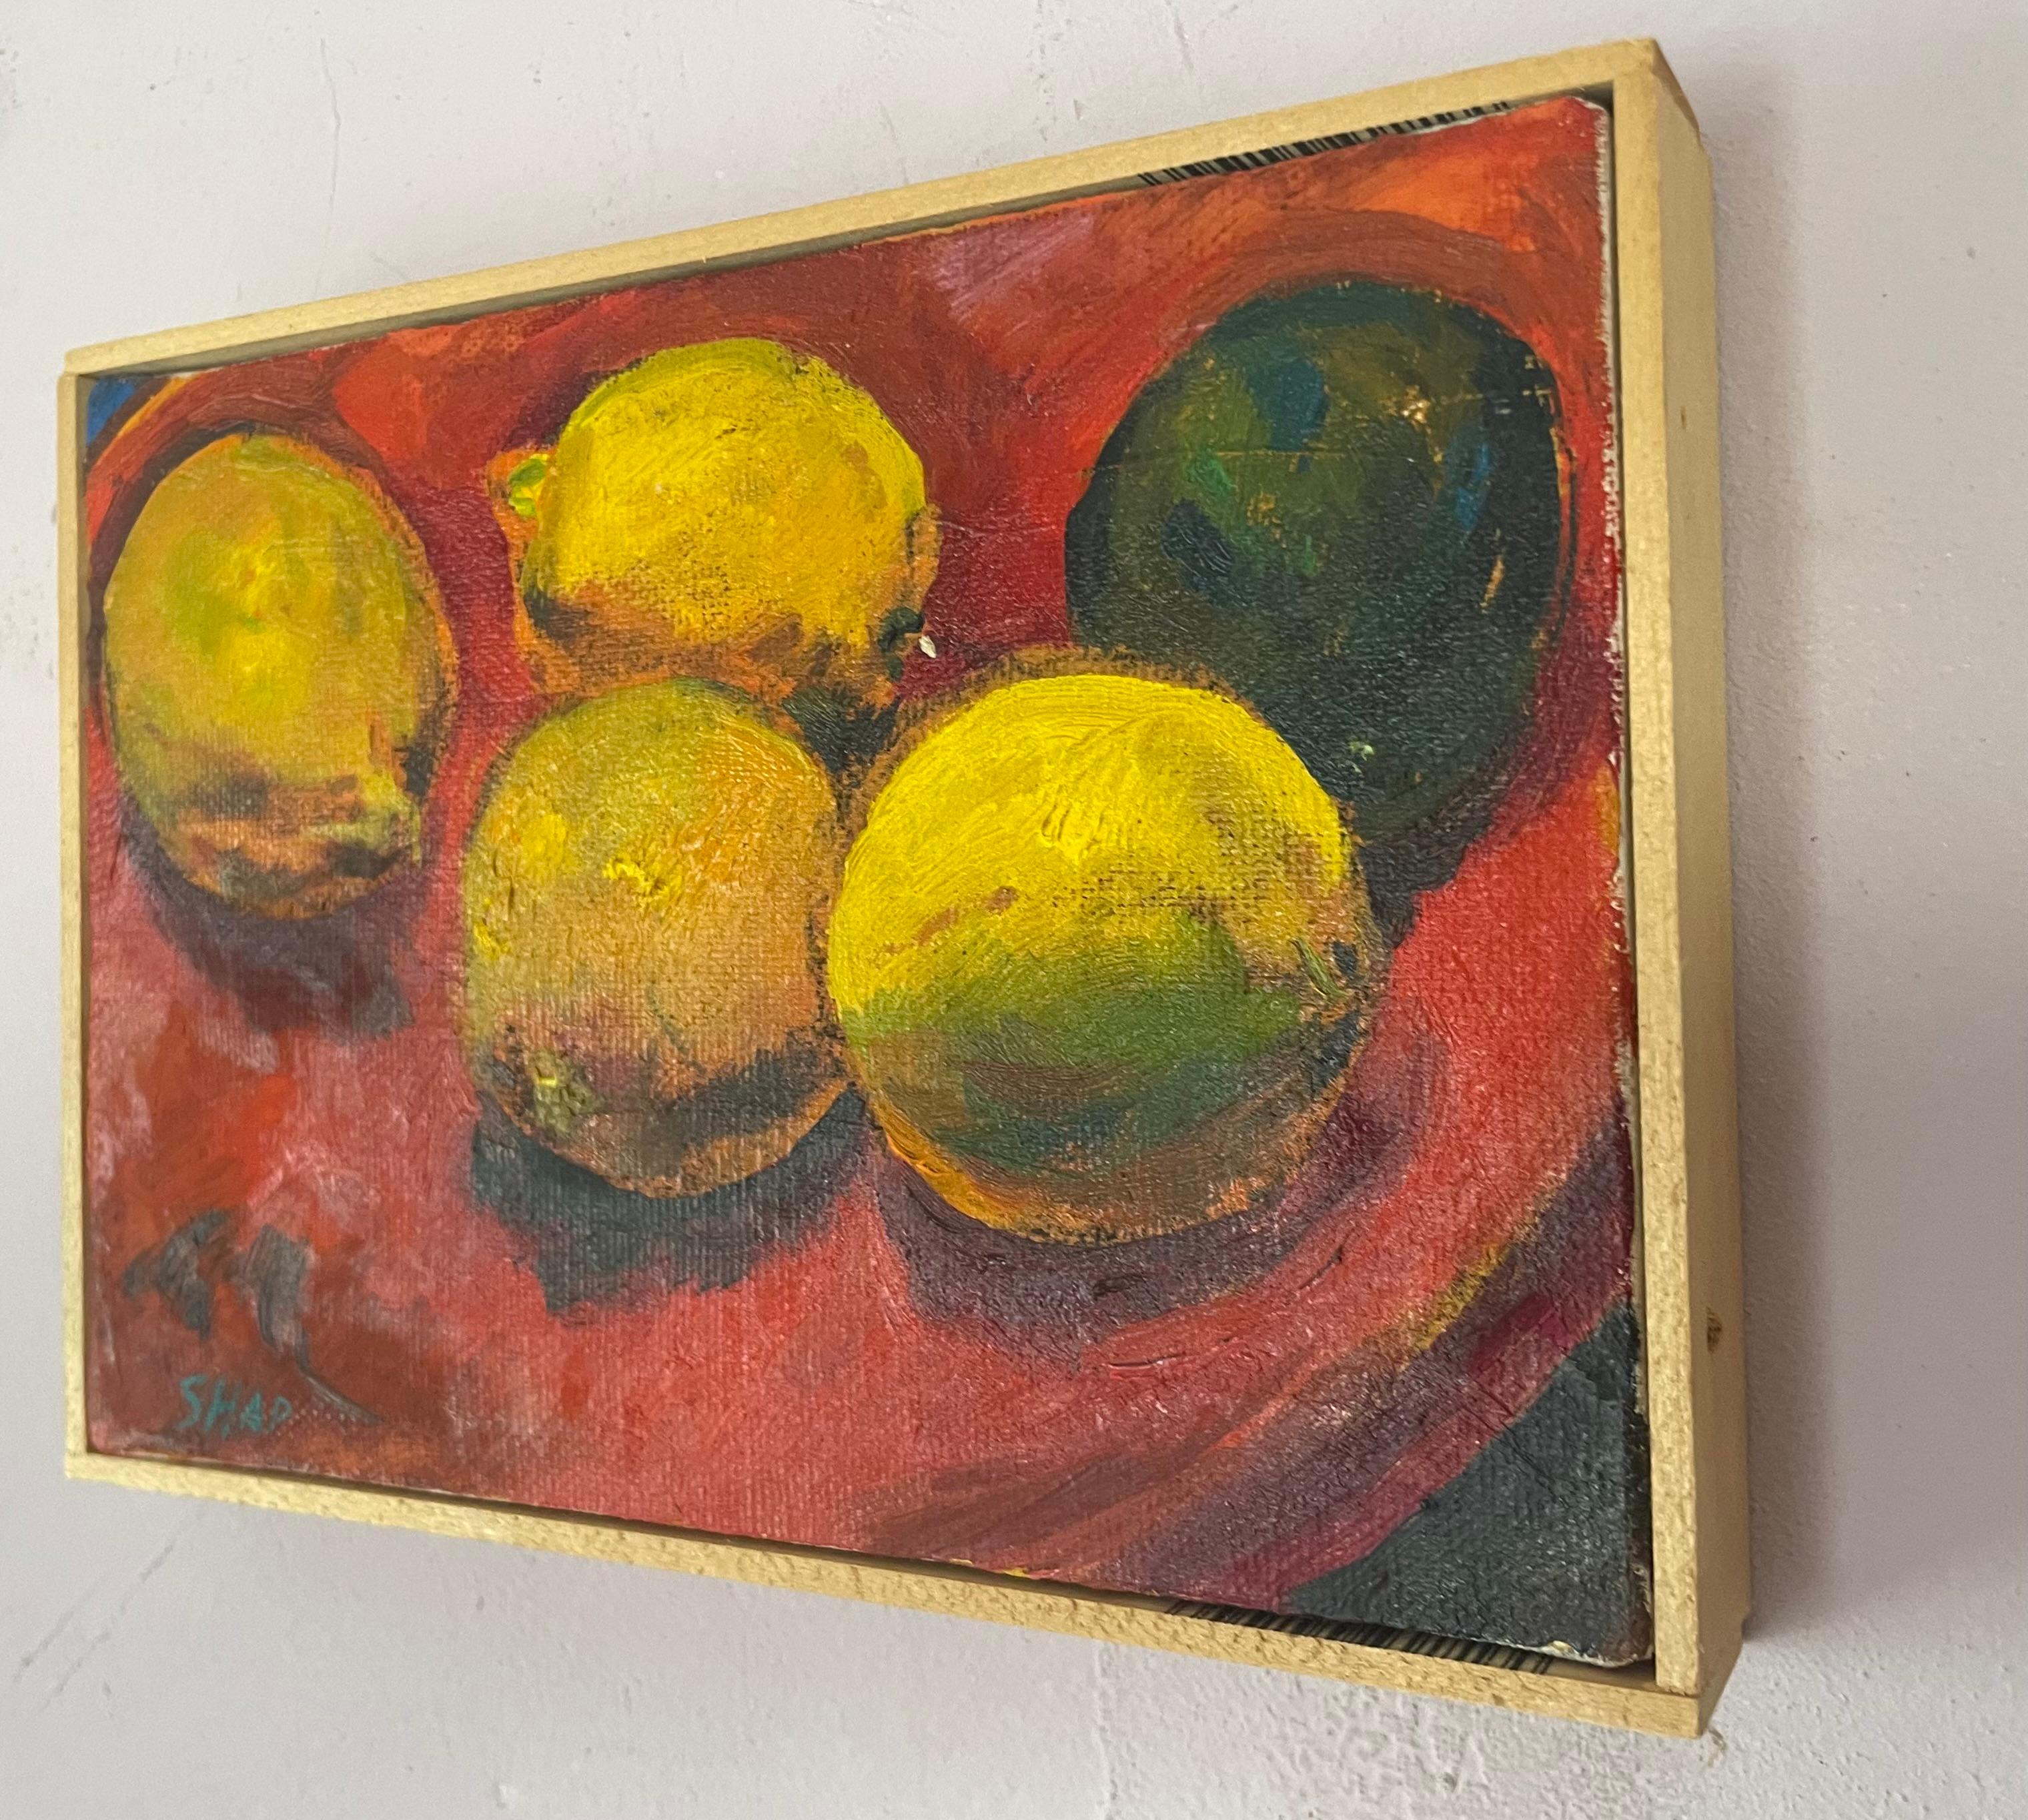 Original oil painting by celebrated, twentieth-century California landscape painter, Ronald Shap. This small still life of yellow lemons and a dark green lime in an orange bowl is in a loose, impressionist style. 5x7 inch canvas on wood block.